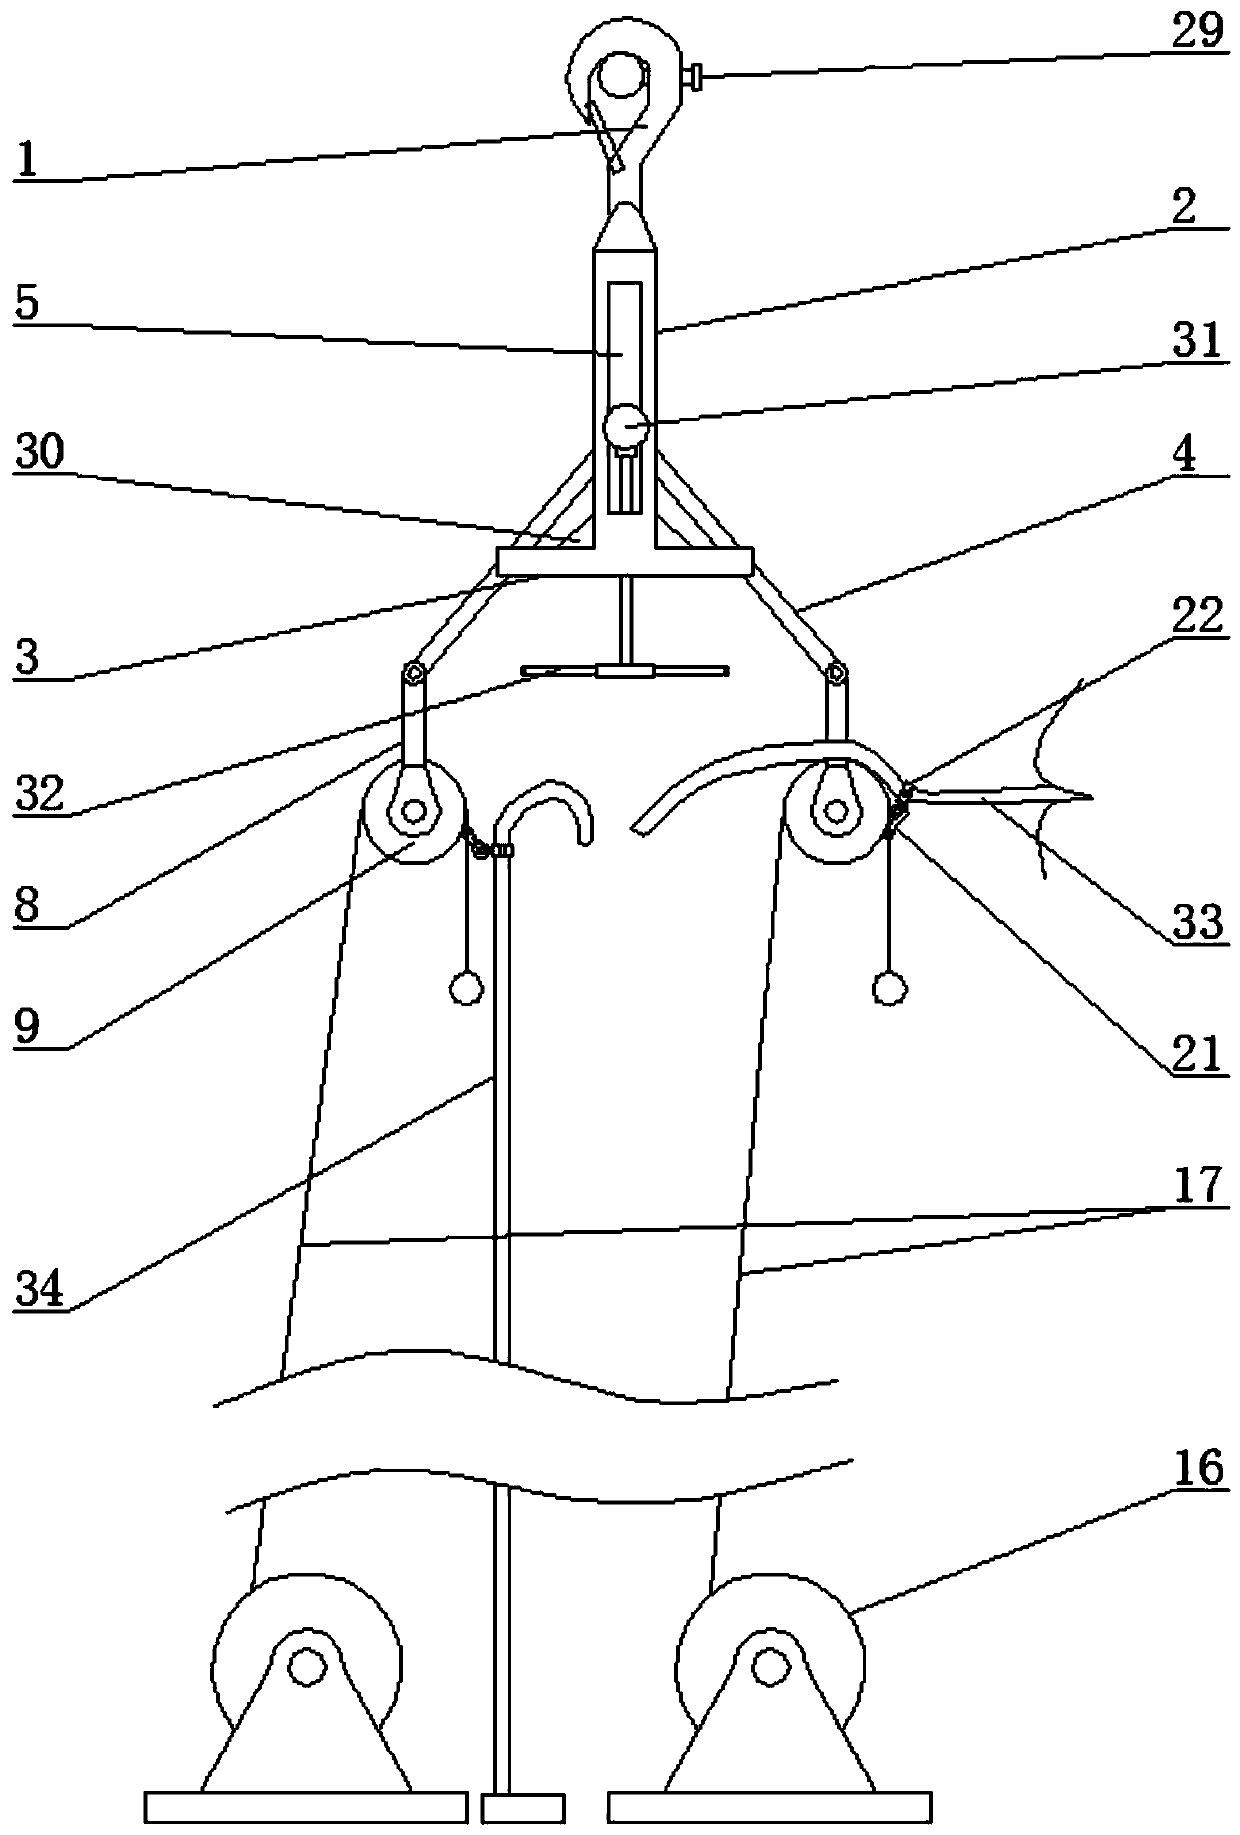 Auxiliary wiring equipment for electric aerial work